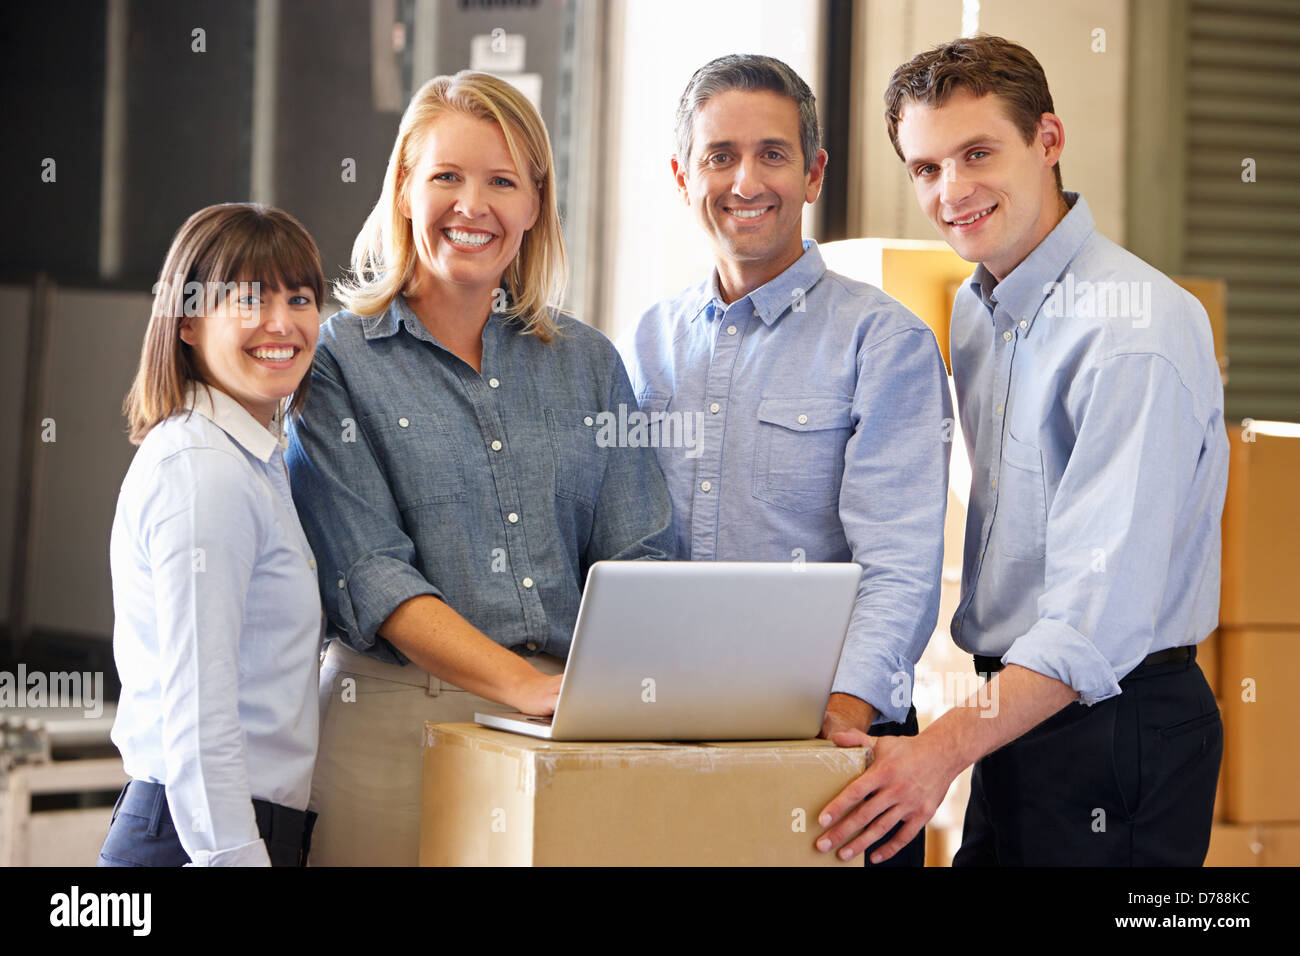 Portrait Of Workers In Distribution Warehouse Stock Photo